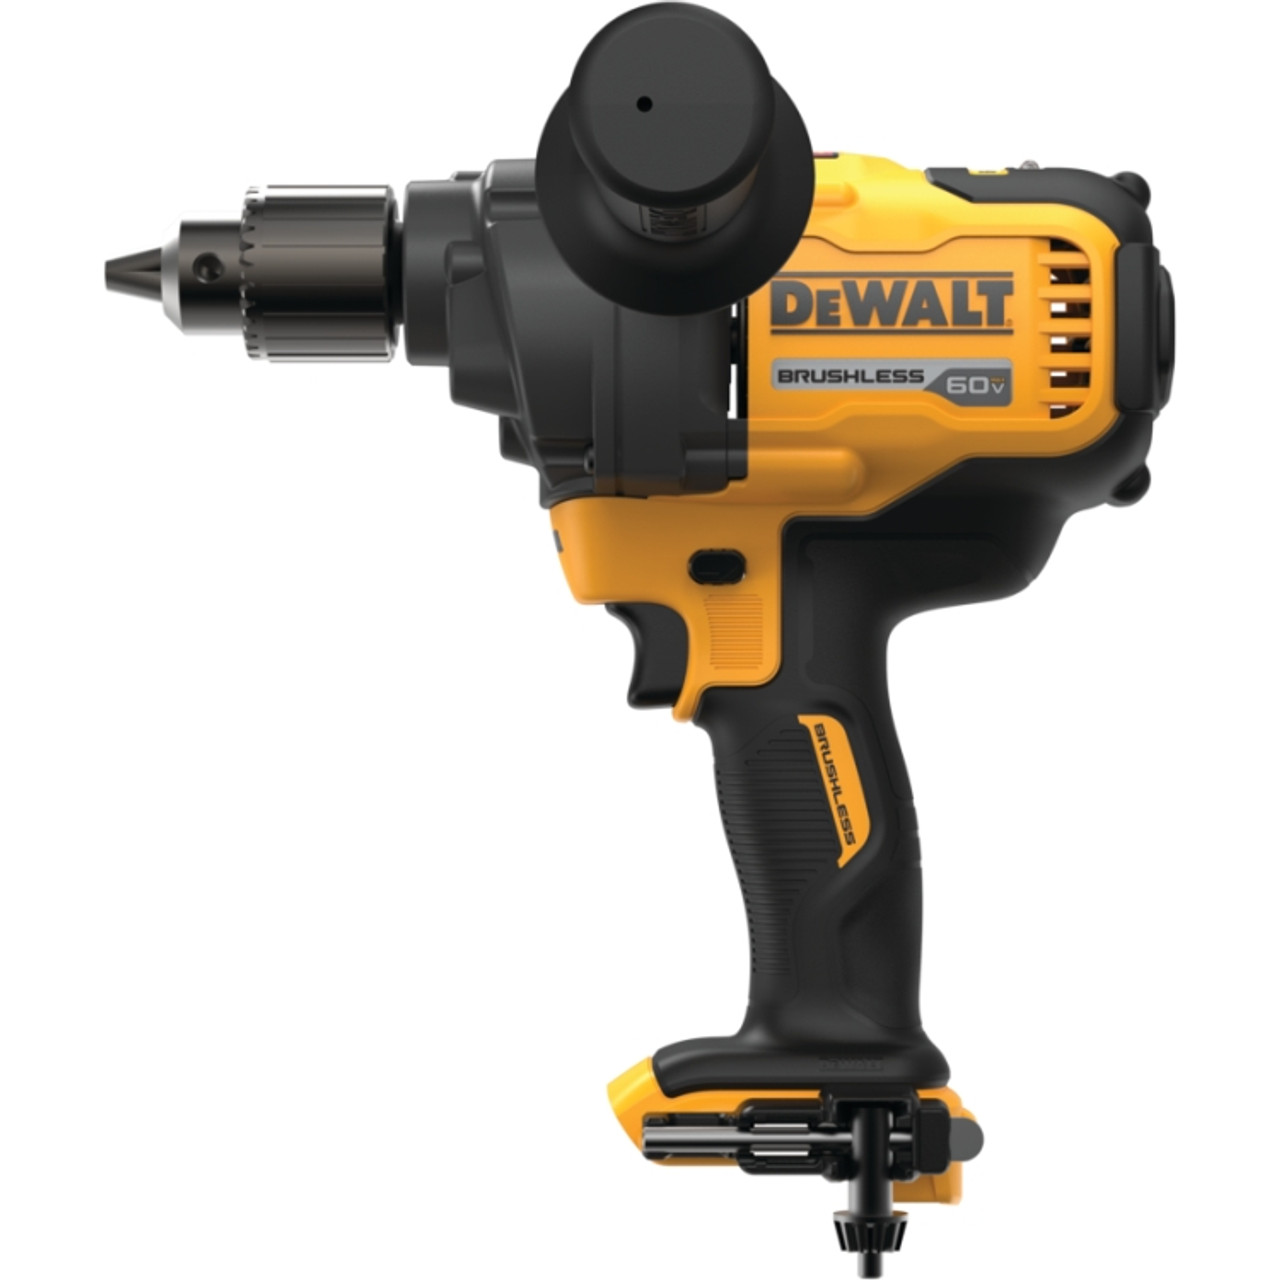 Dewalt DCD130B 60V MAX* Mixer/Drill With E-Clutch System (Tool Only)